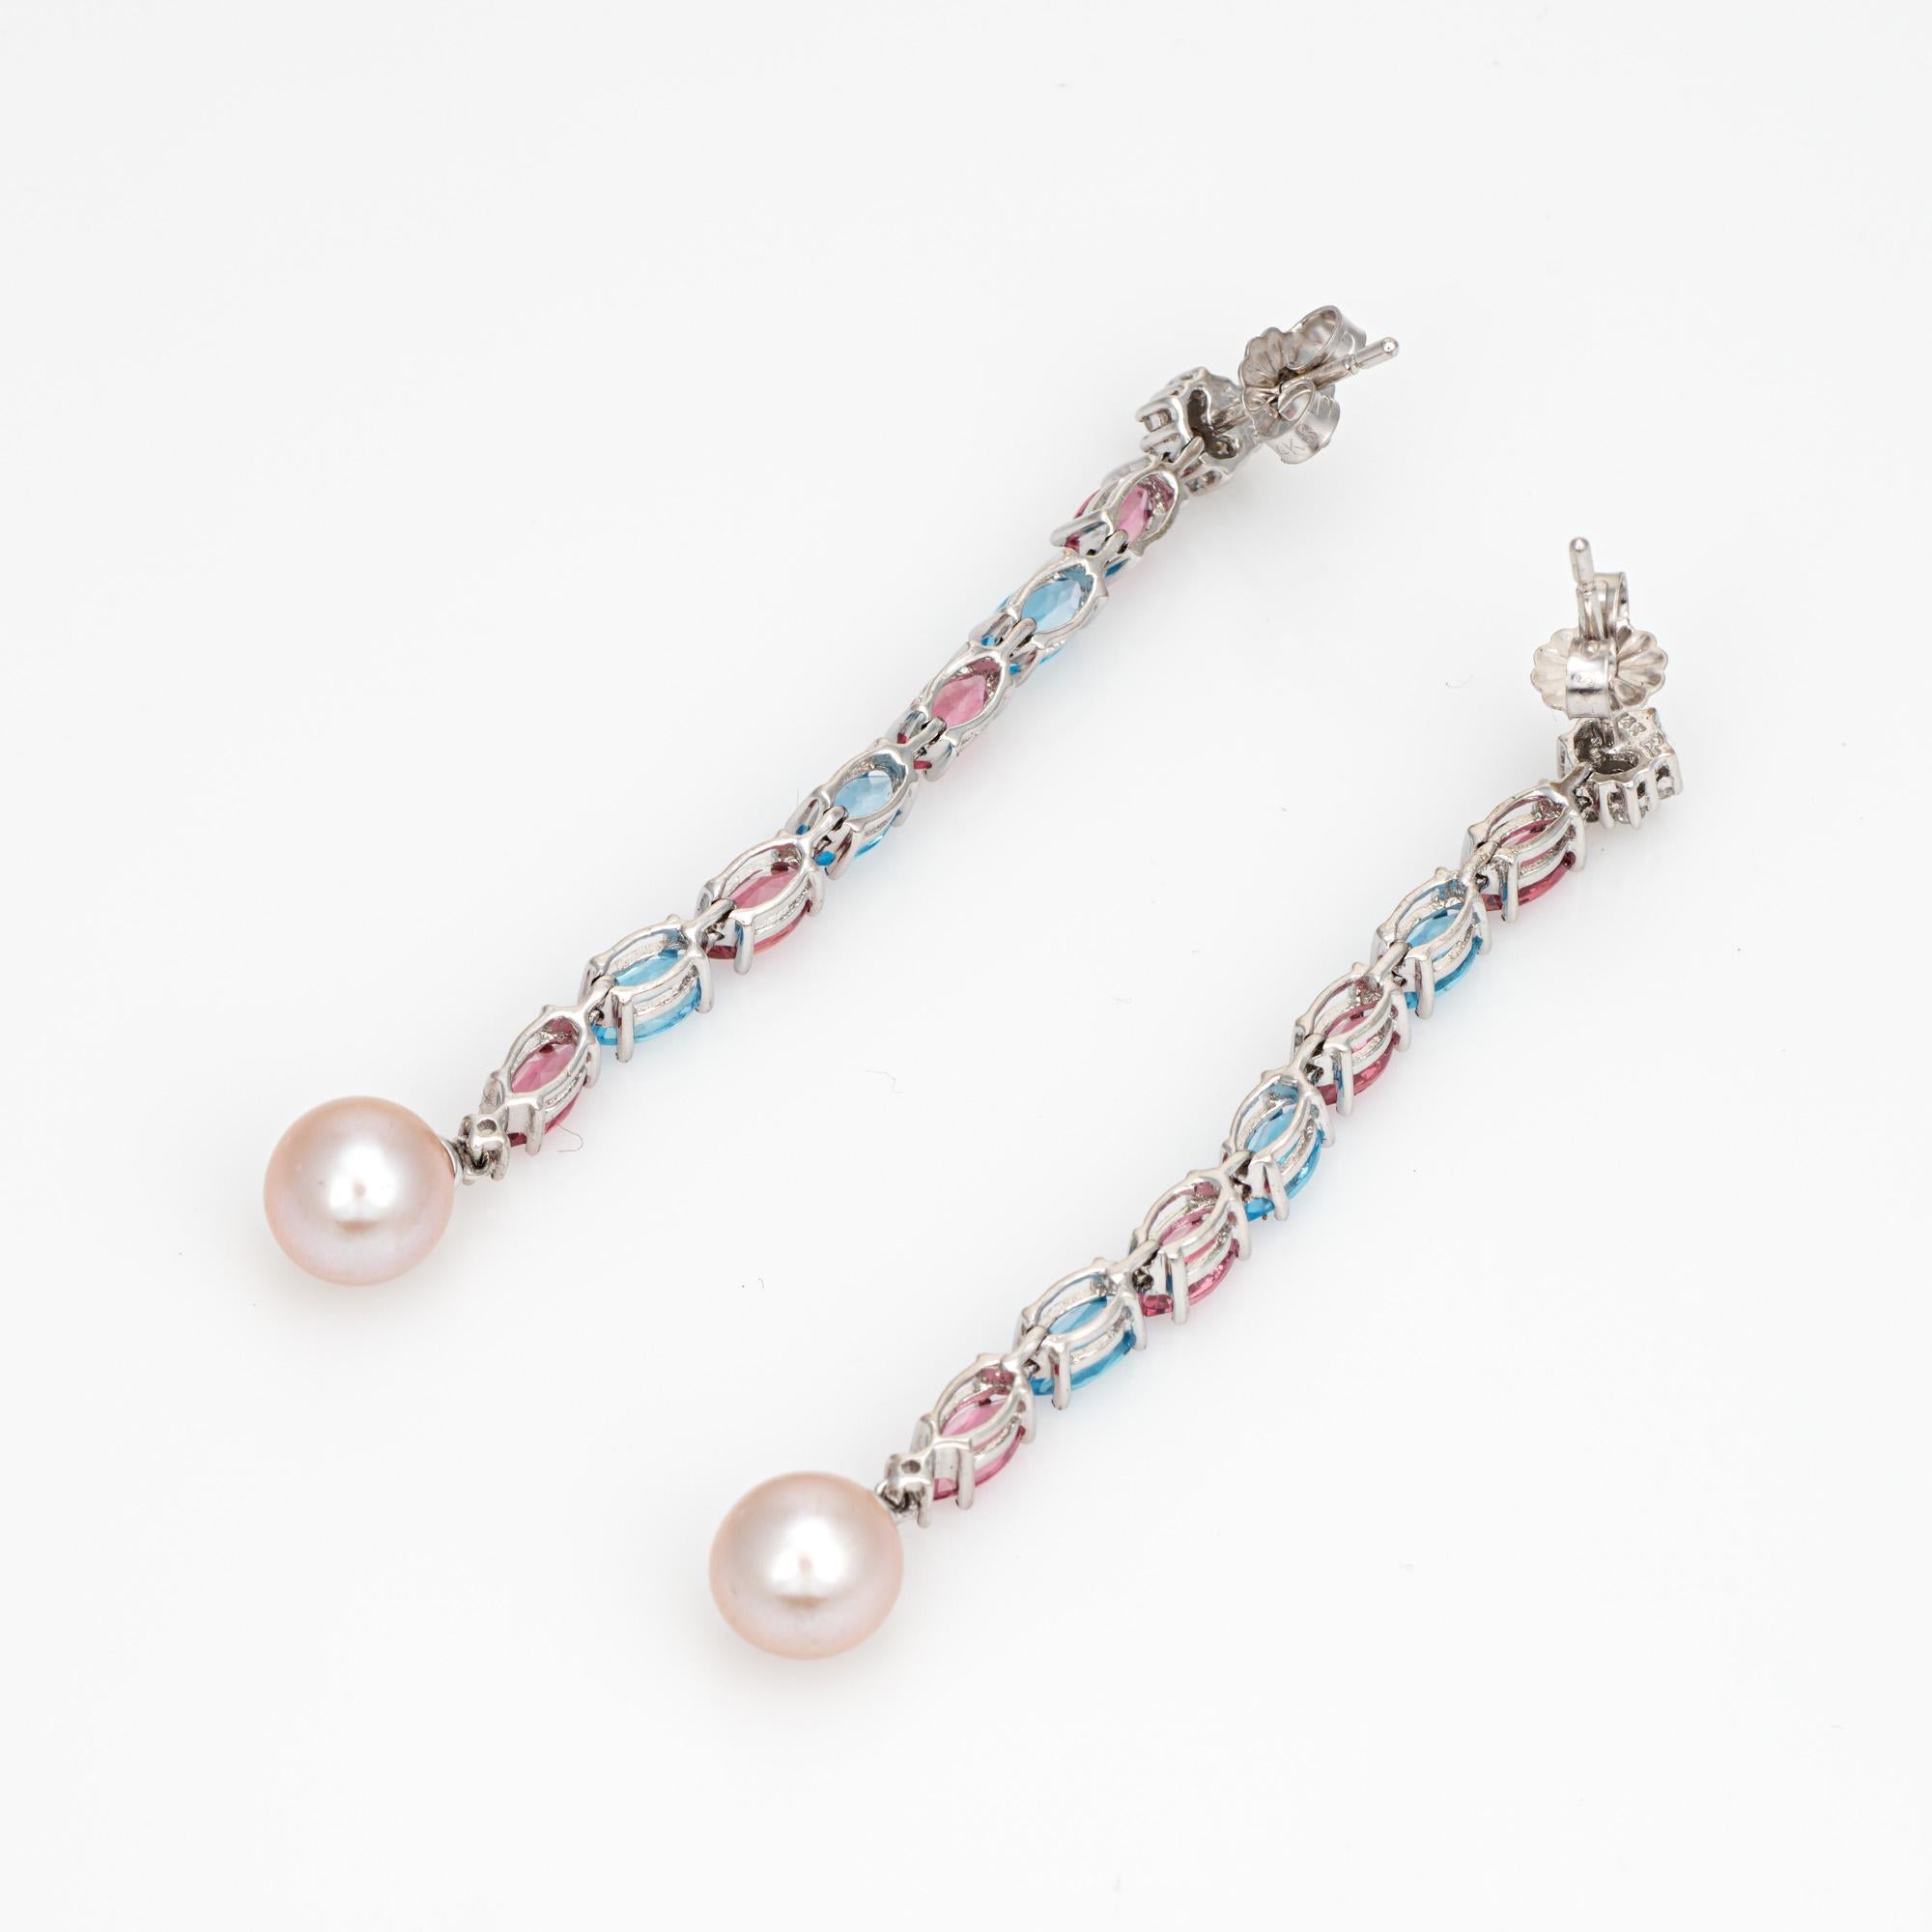 Stylish pair of blue & pink topaz drop earrings, crafted in 14k white gold. 

Oval faceted blue & pink topaz total an estimated 3.50 carats. Diamonds total an estimated 0.10 carats (estimated at H-I color and I1-2 clarity). Cultured pearls measure